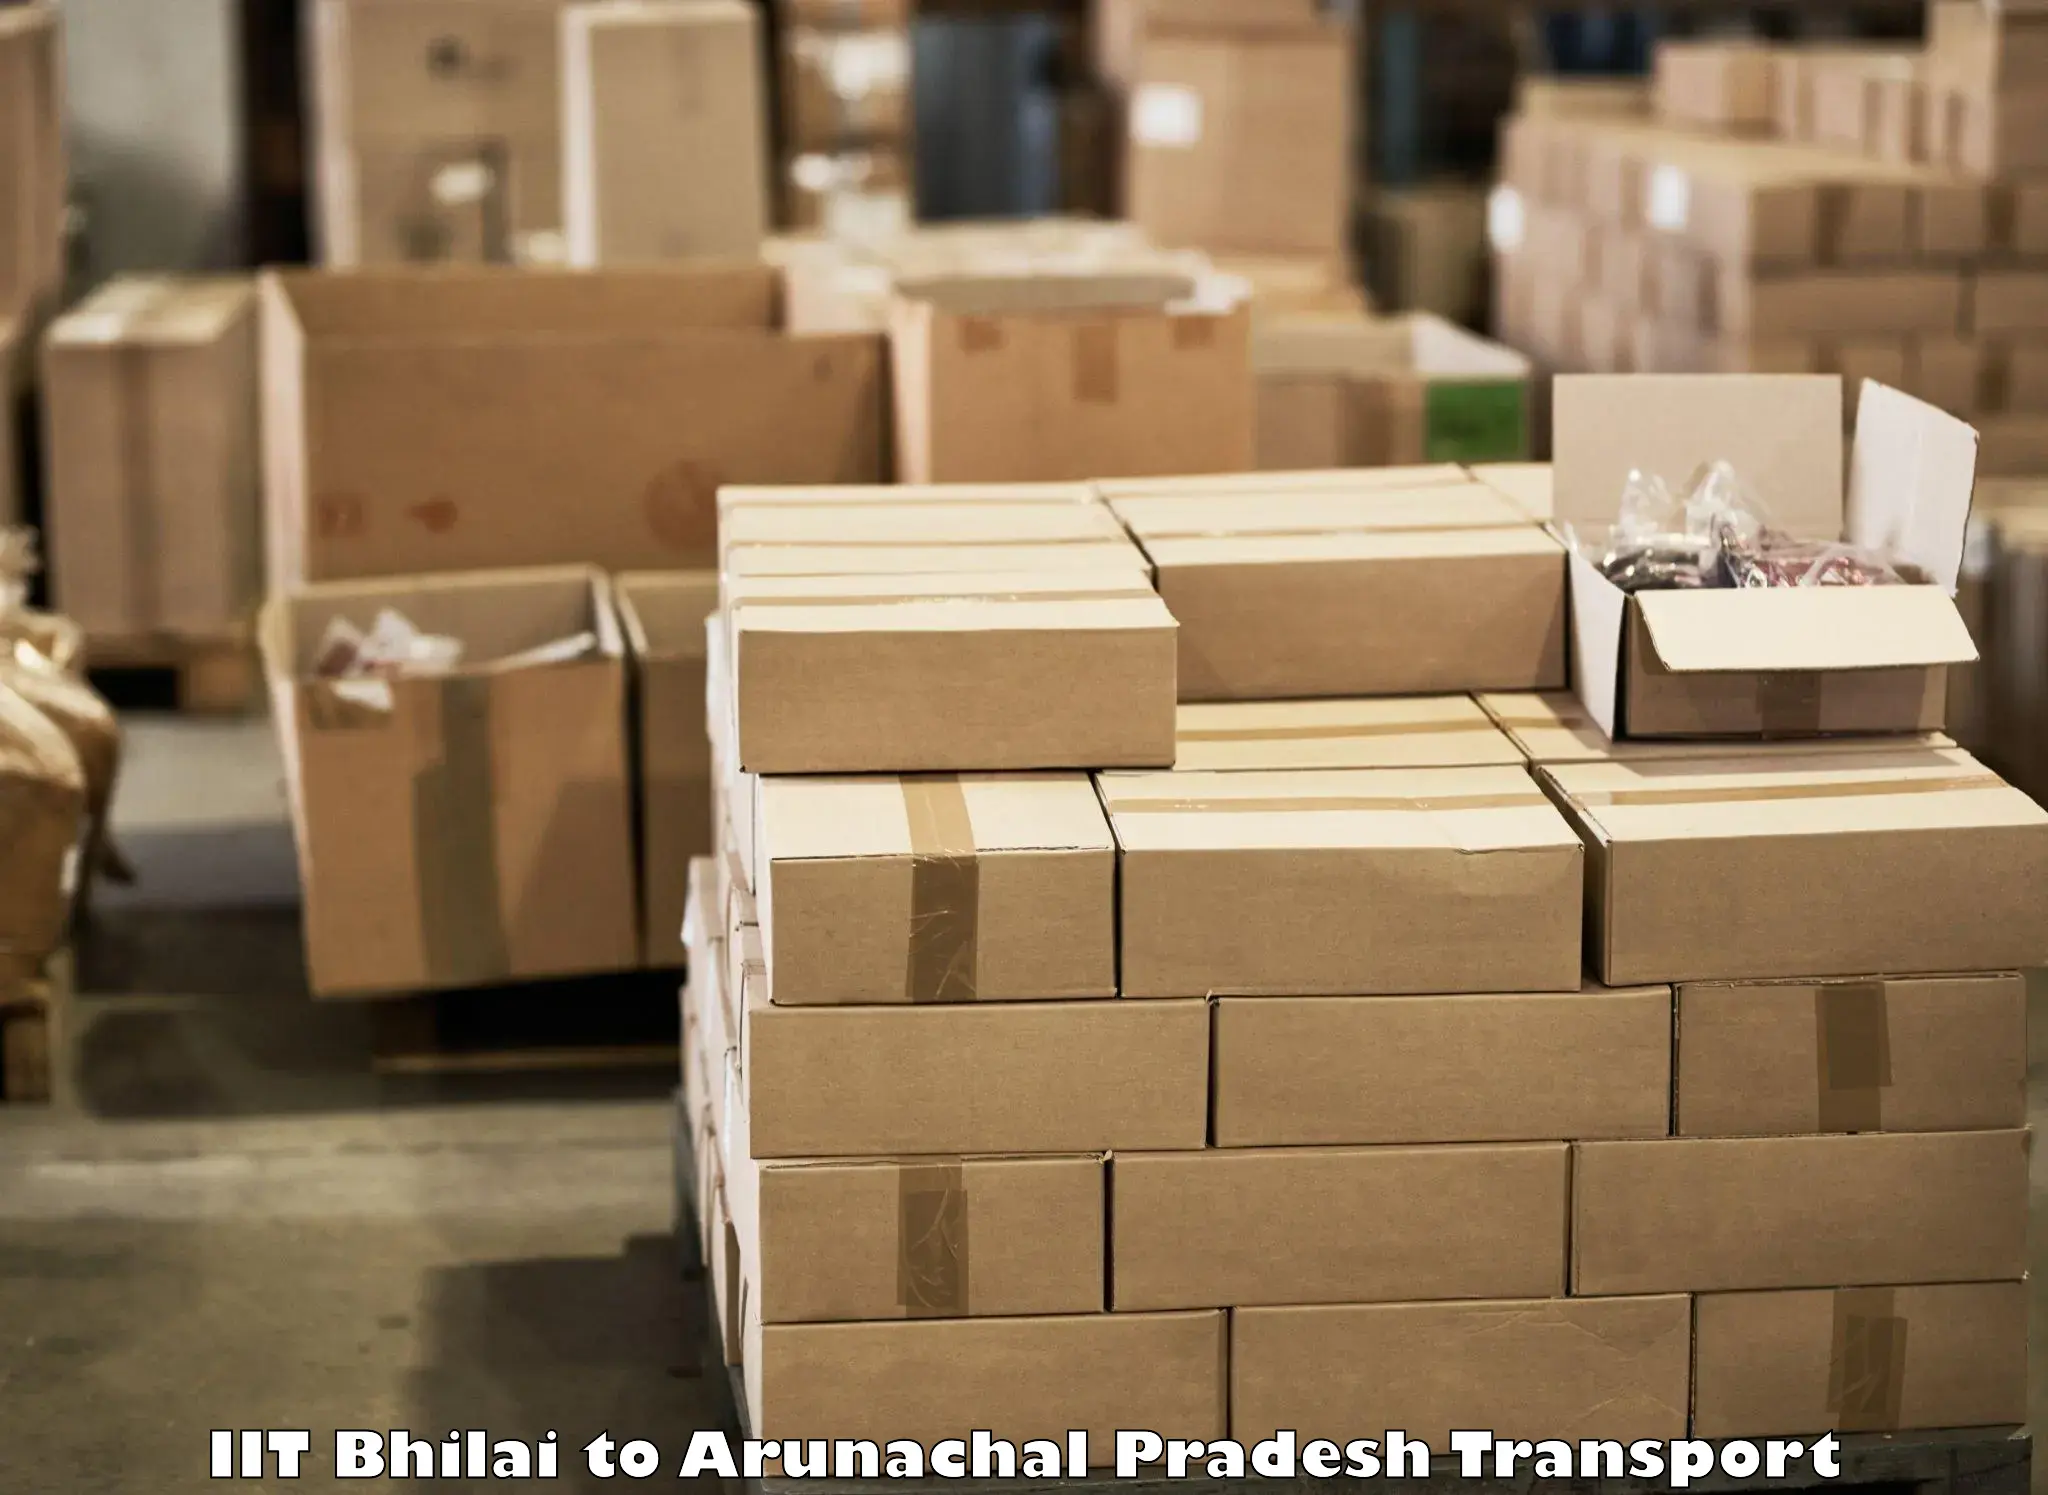 Daily parcel service transport IIT Bhilai to Pasighat